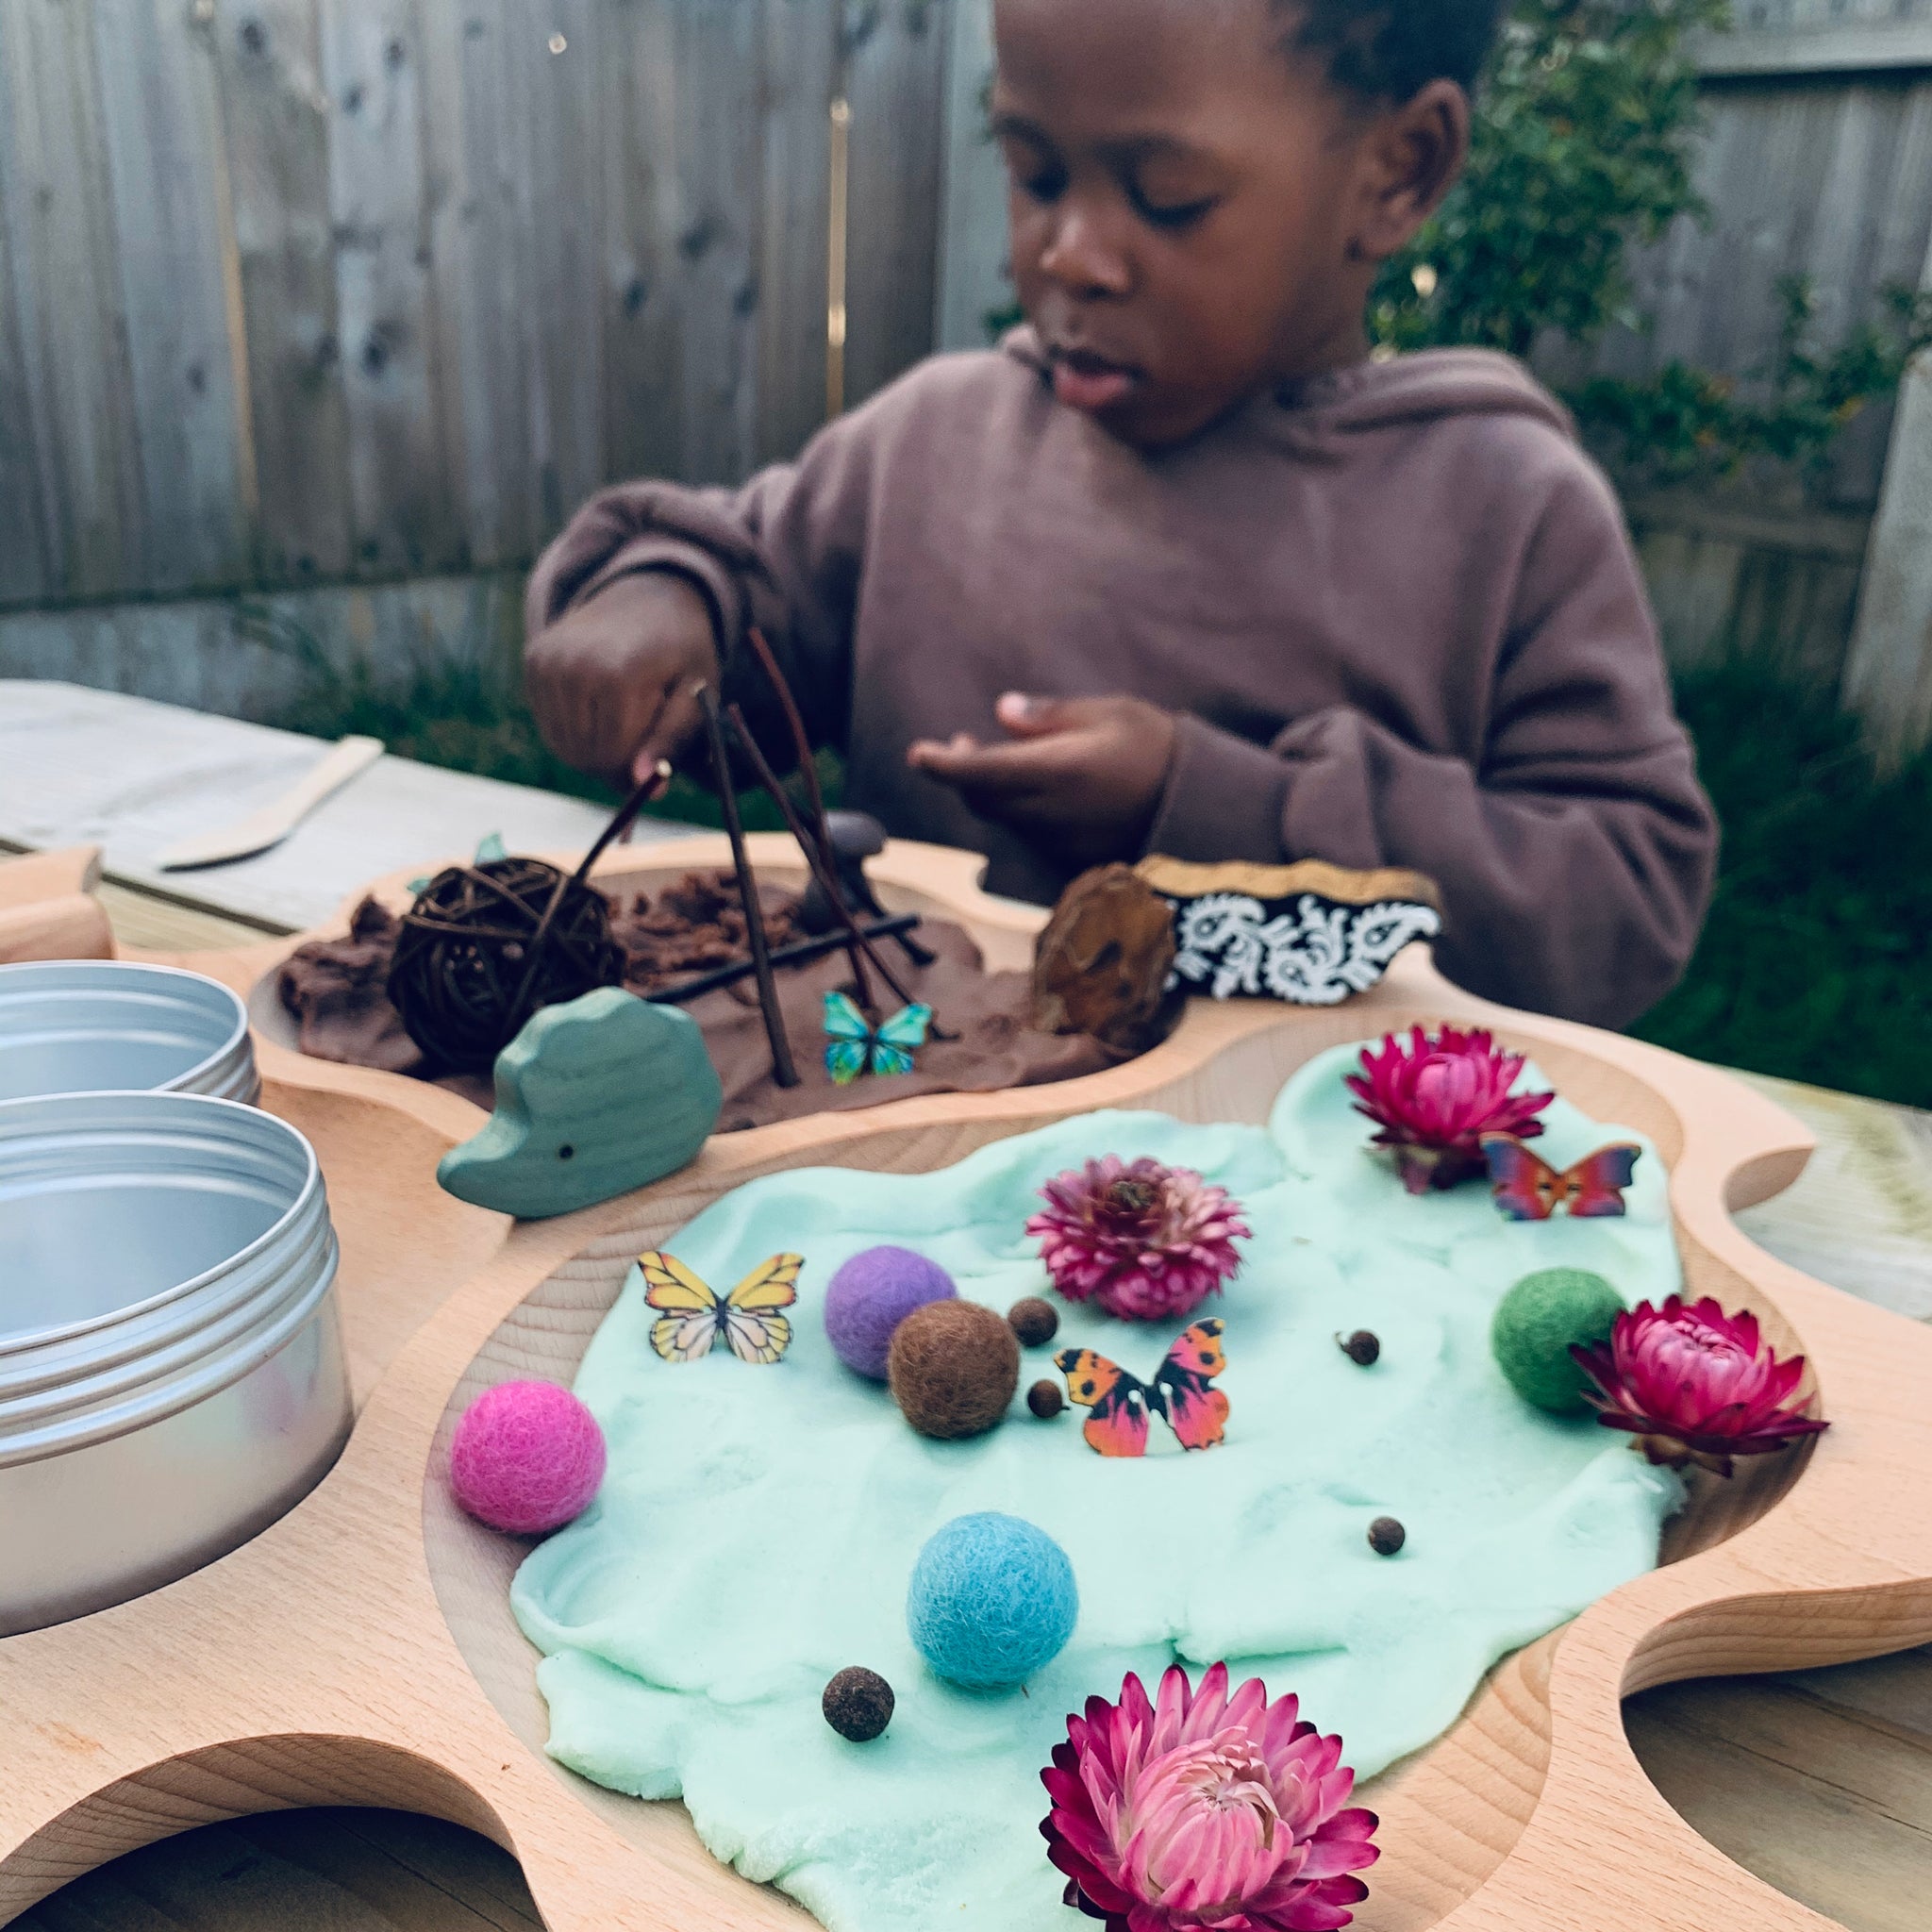 hedgehog play dough kit in action